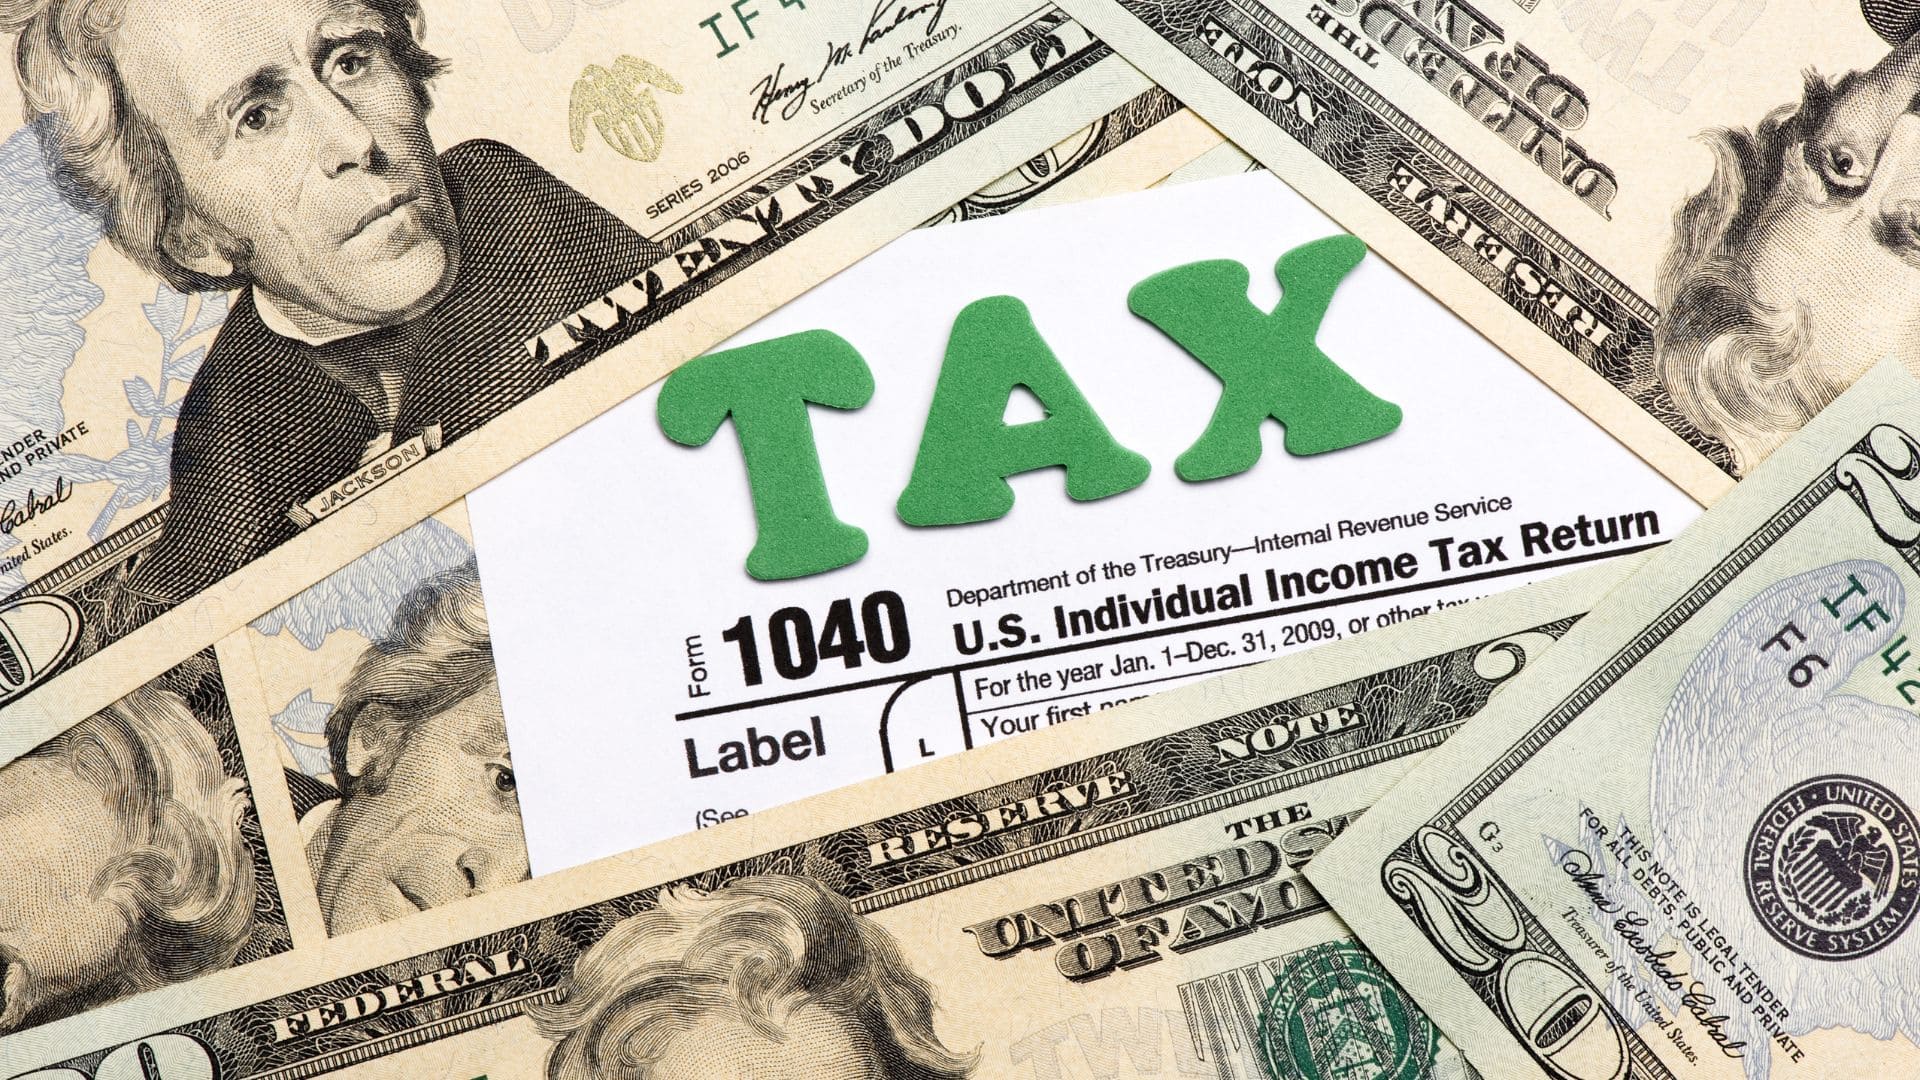 You could get help from IRS to send your Tax Return